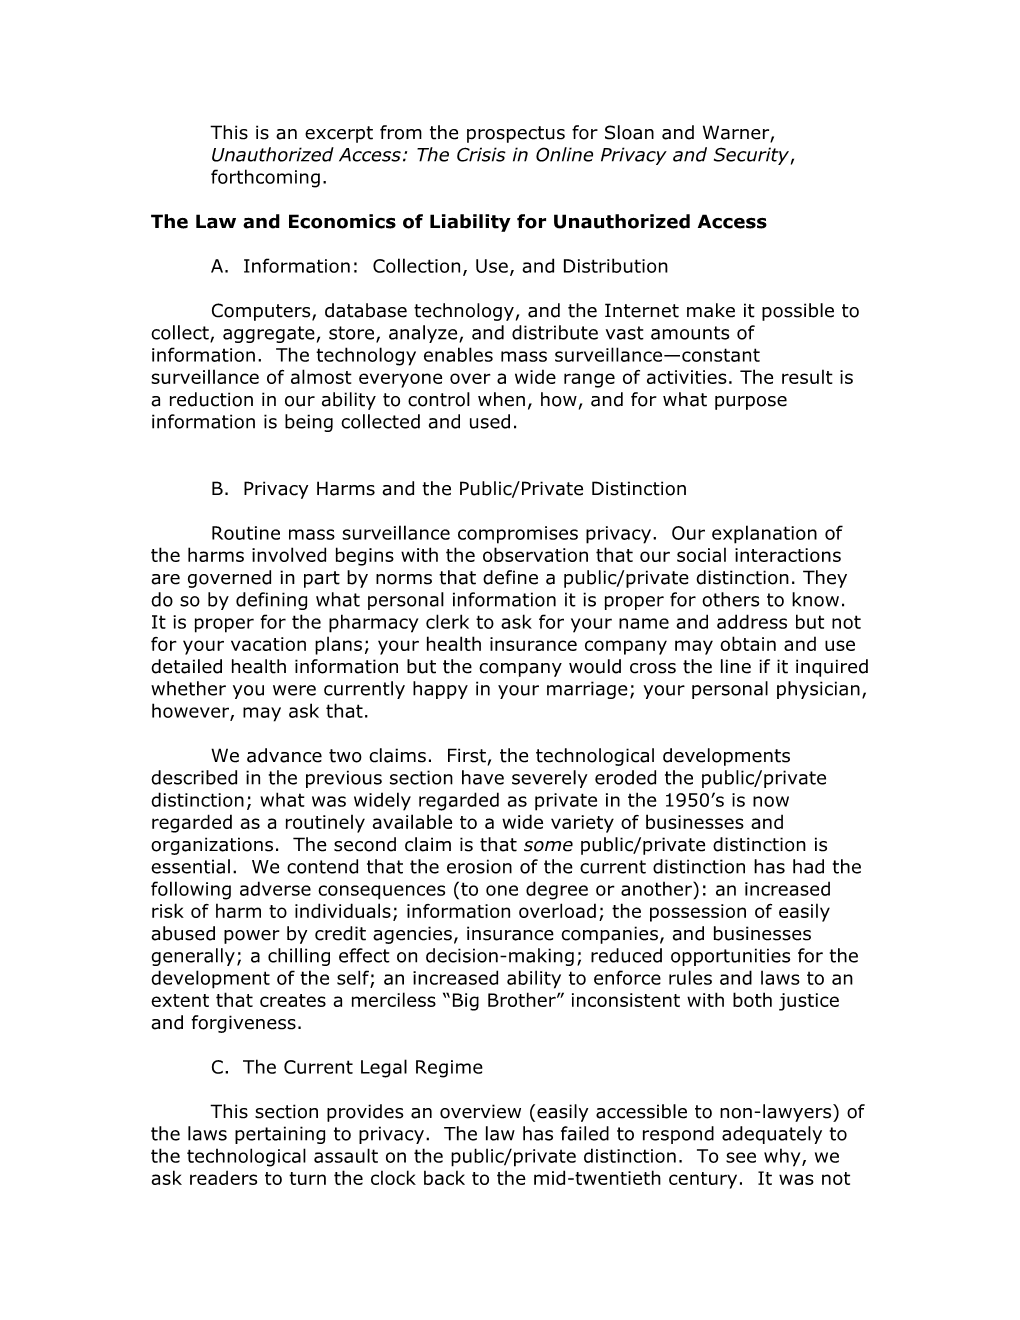 The Law And Economics Of Liability For Unauthorized Access